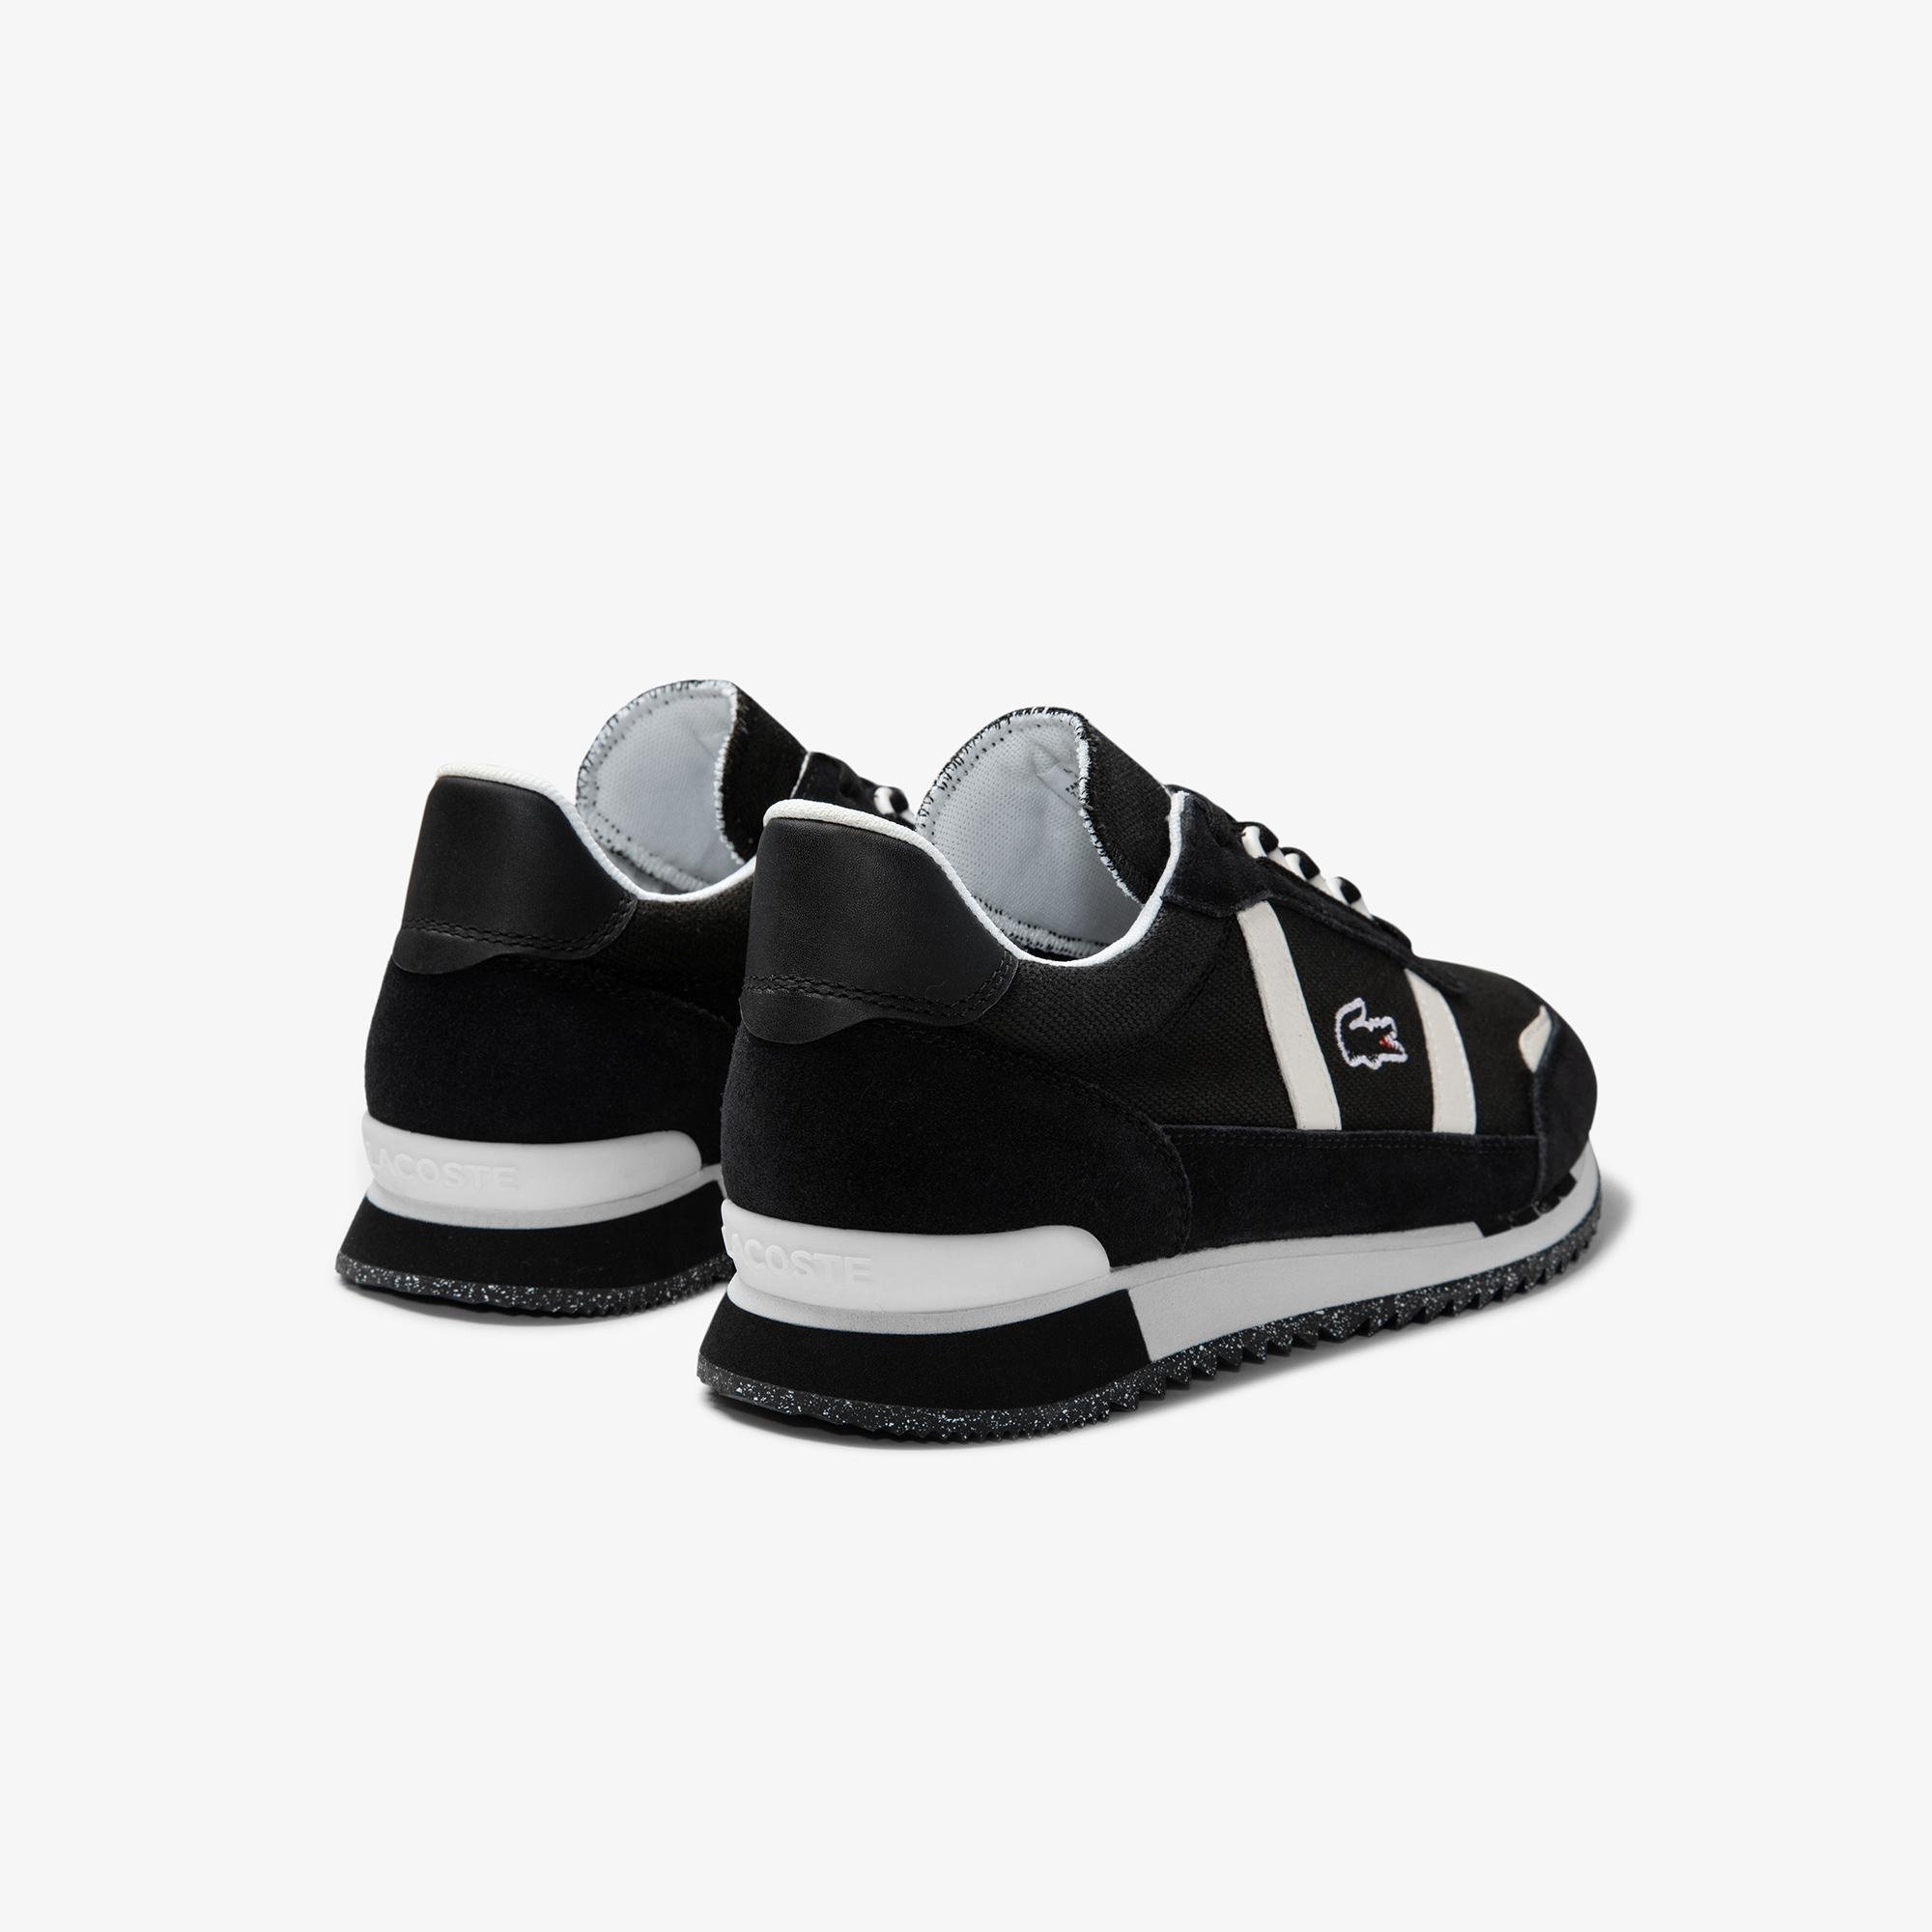 Lacoste Women's Partner Retro Canvas and Suede Sneakers